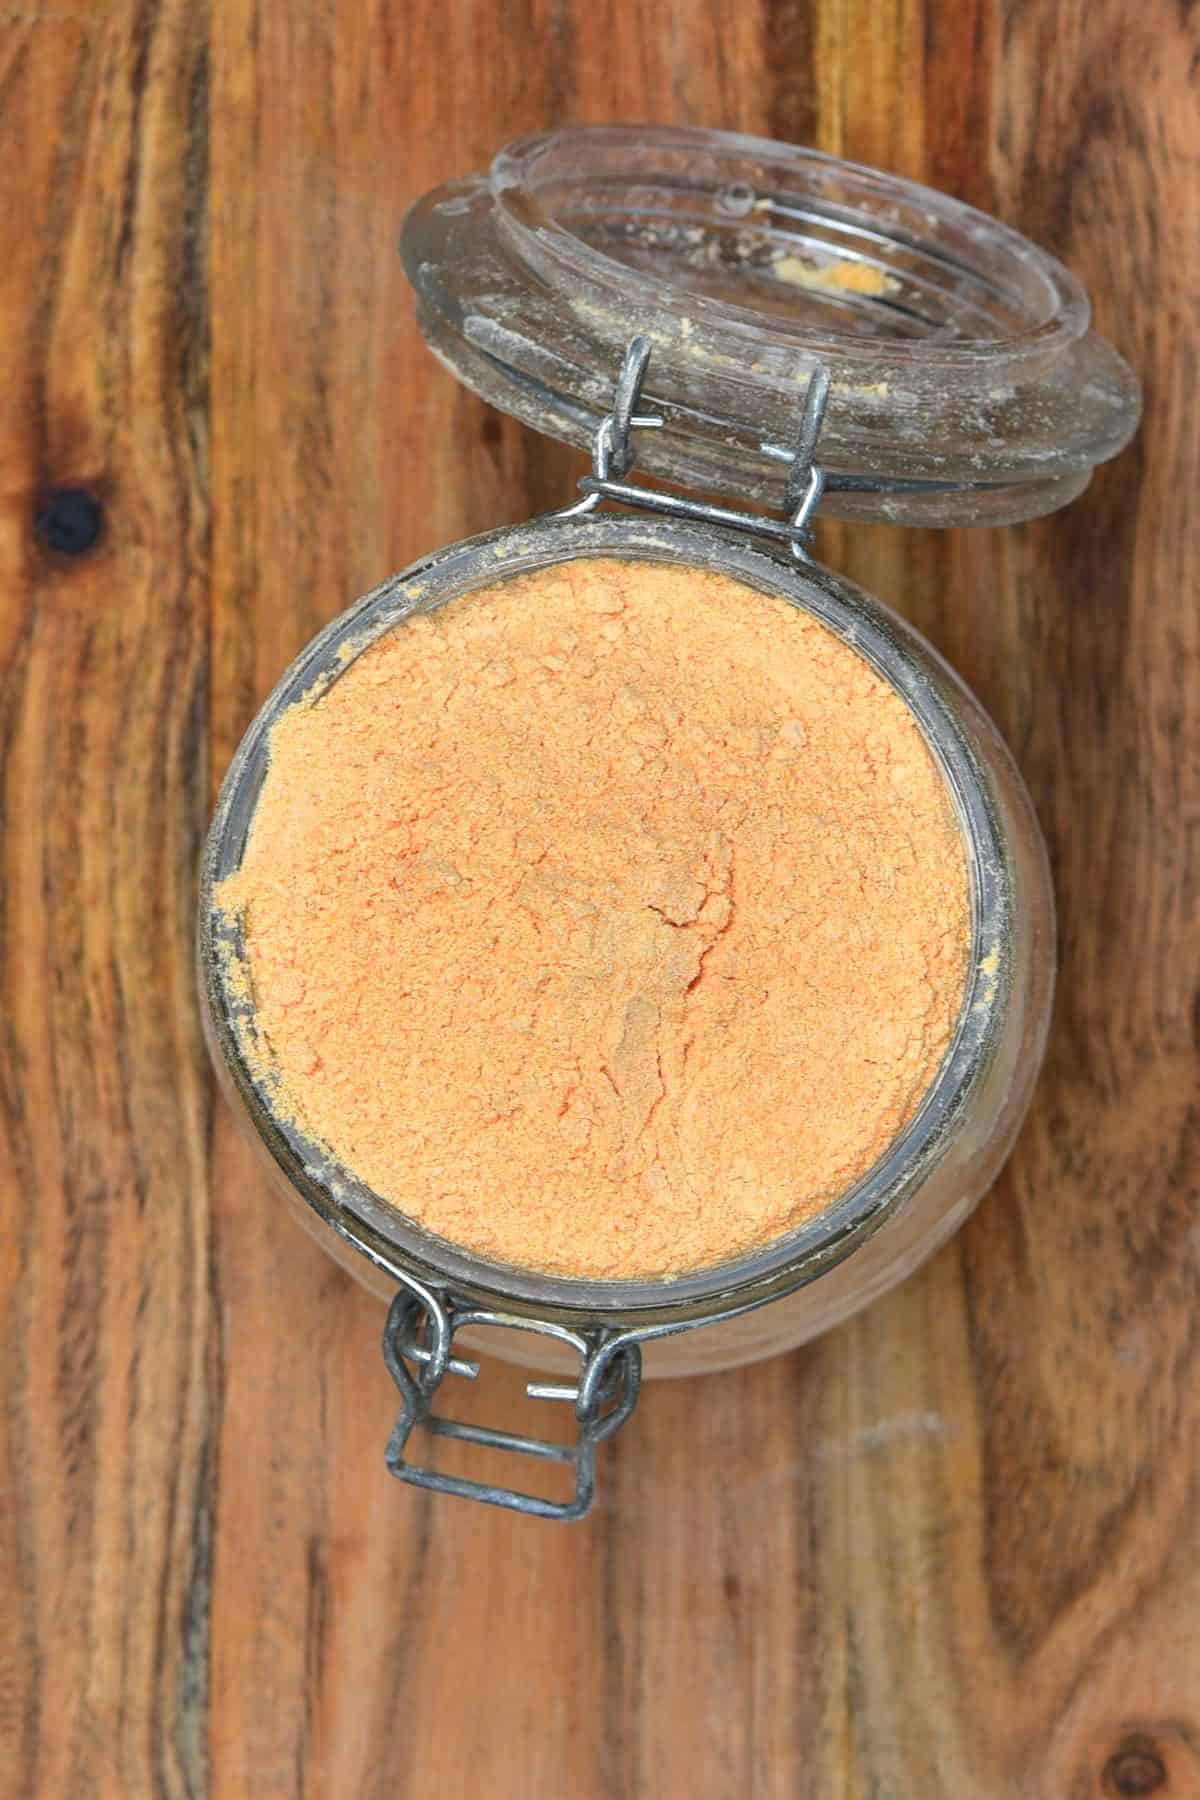 Top view of a jar full with red lentil flour